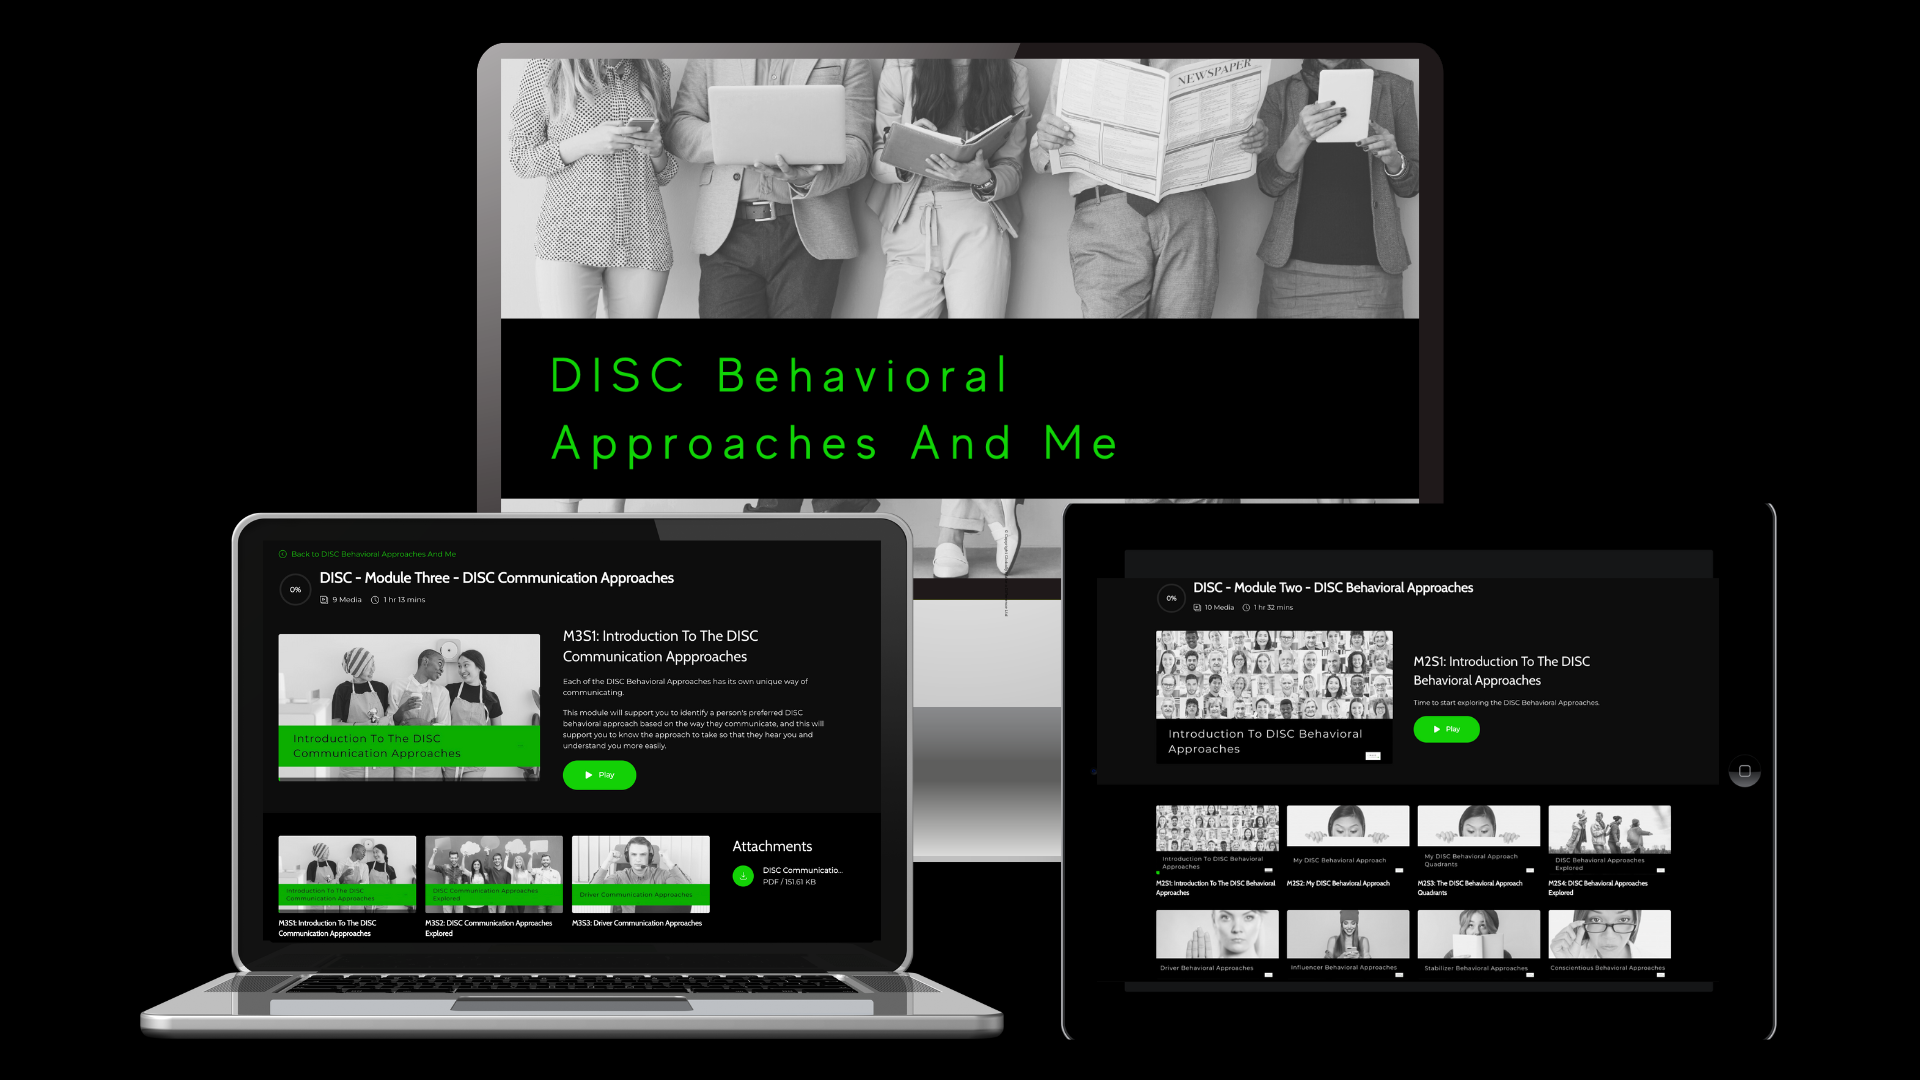 DISC Behavioral Approaches And Me